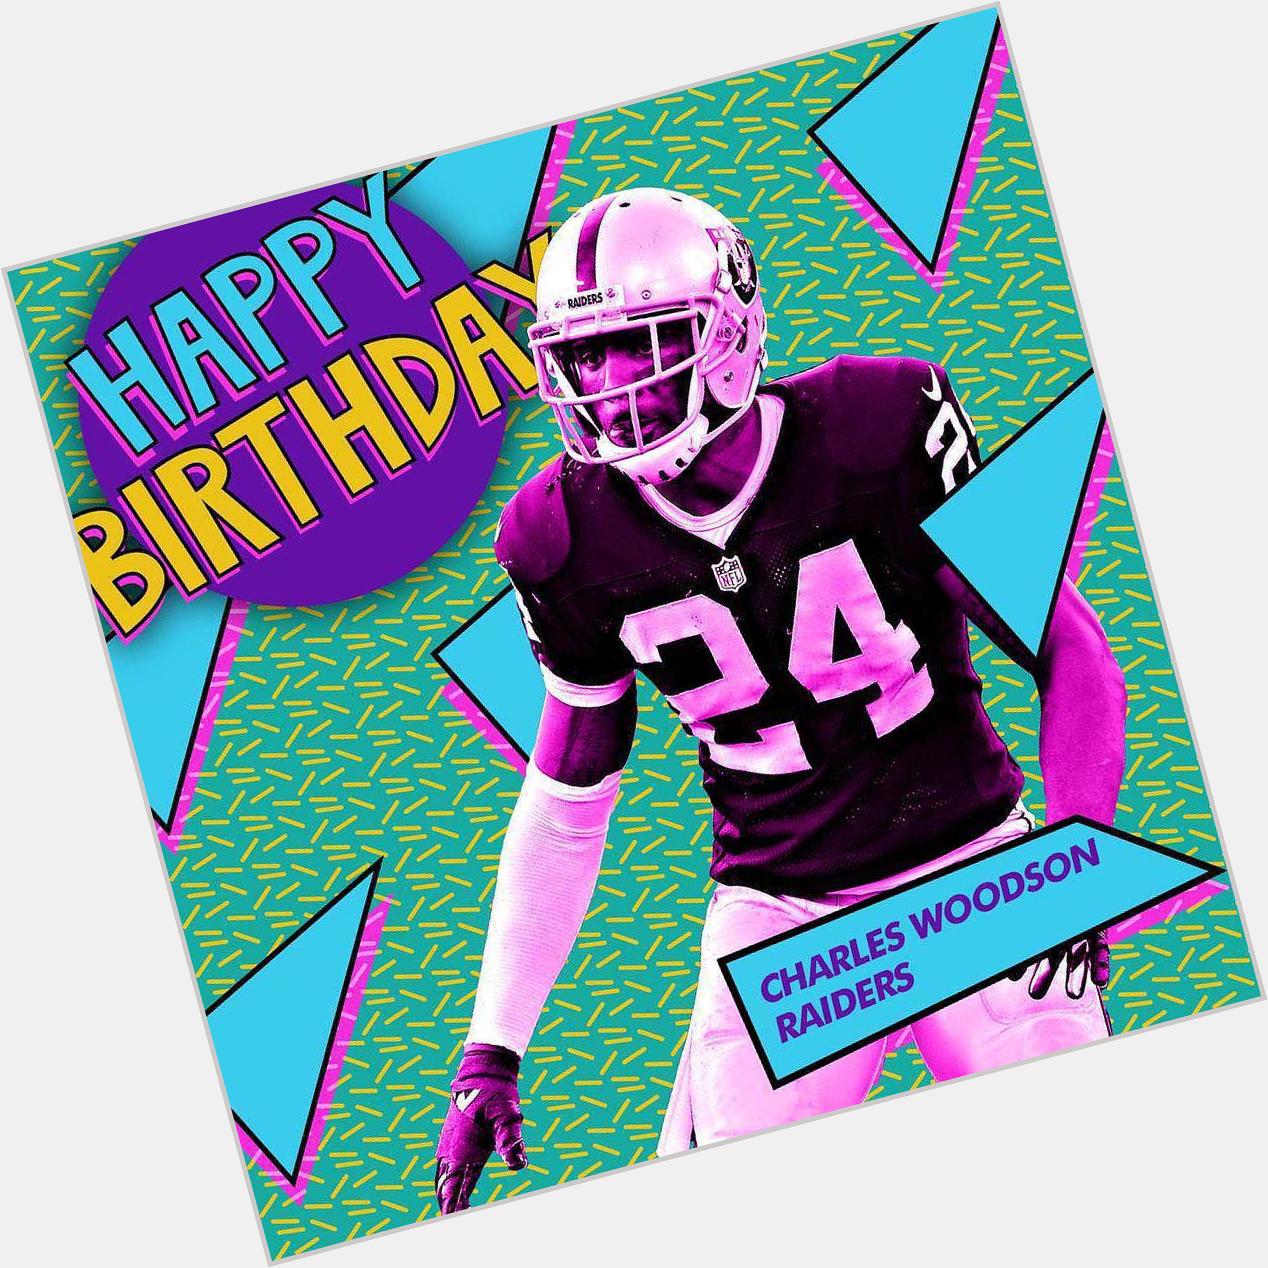 NFL 8 Pro Bowls. 3x 1st-Team All-Pro. 2009 DPOY. 39 years old. Happy Birthday, 